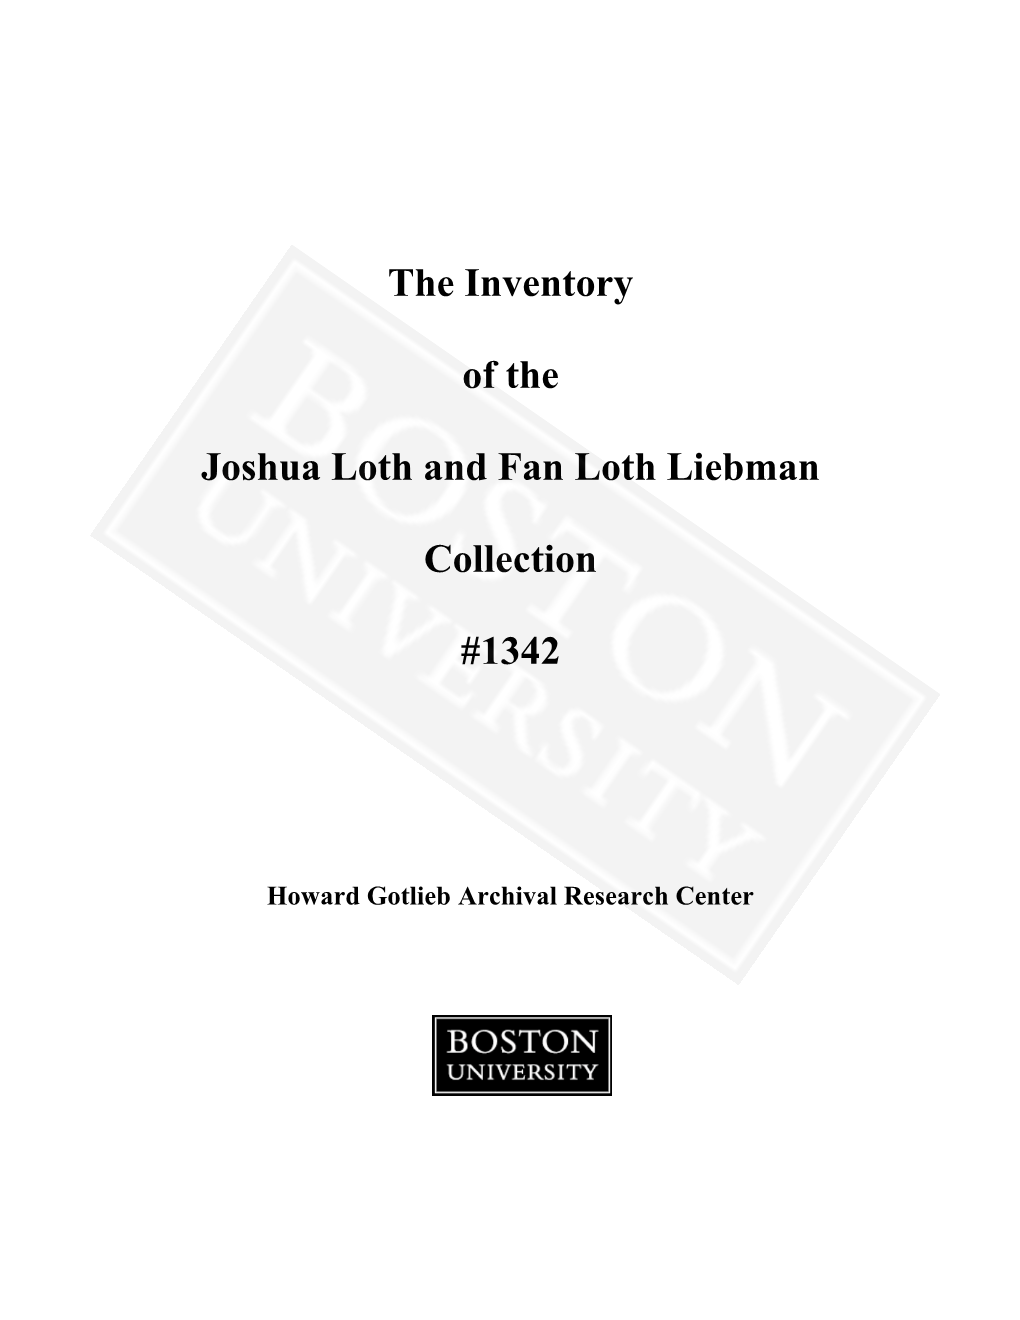 The Inventory of the Joshua Loth and Fan Loth Liebman Collection #1342